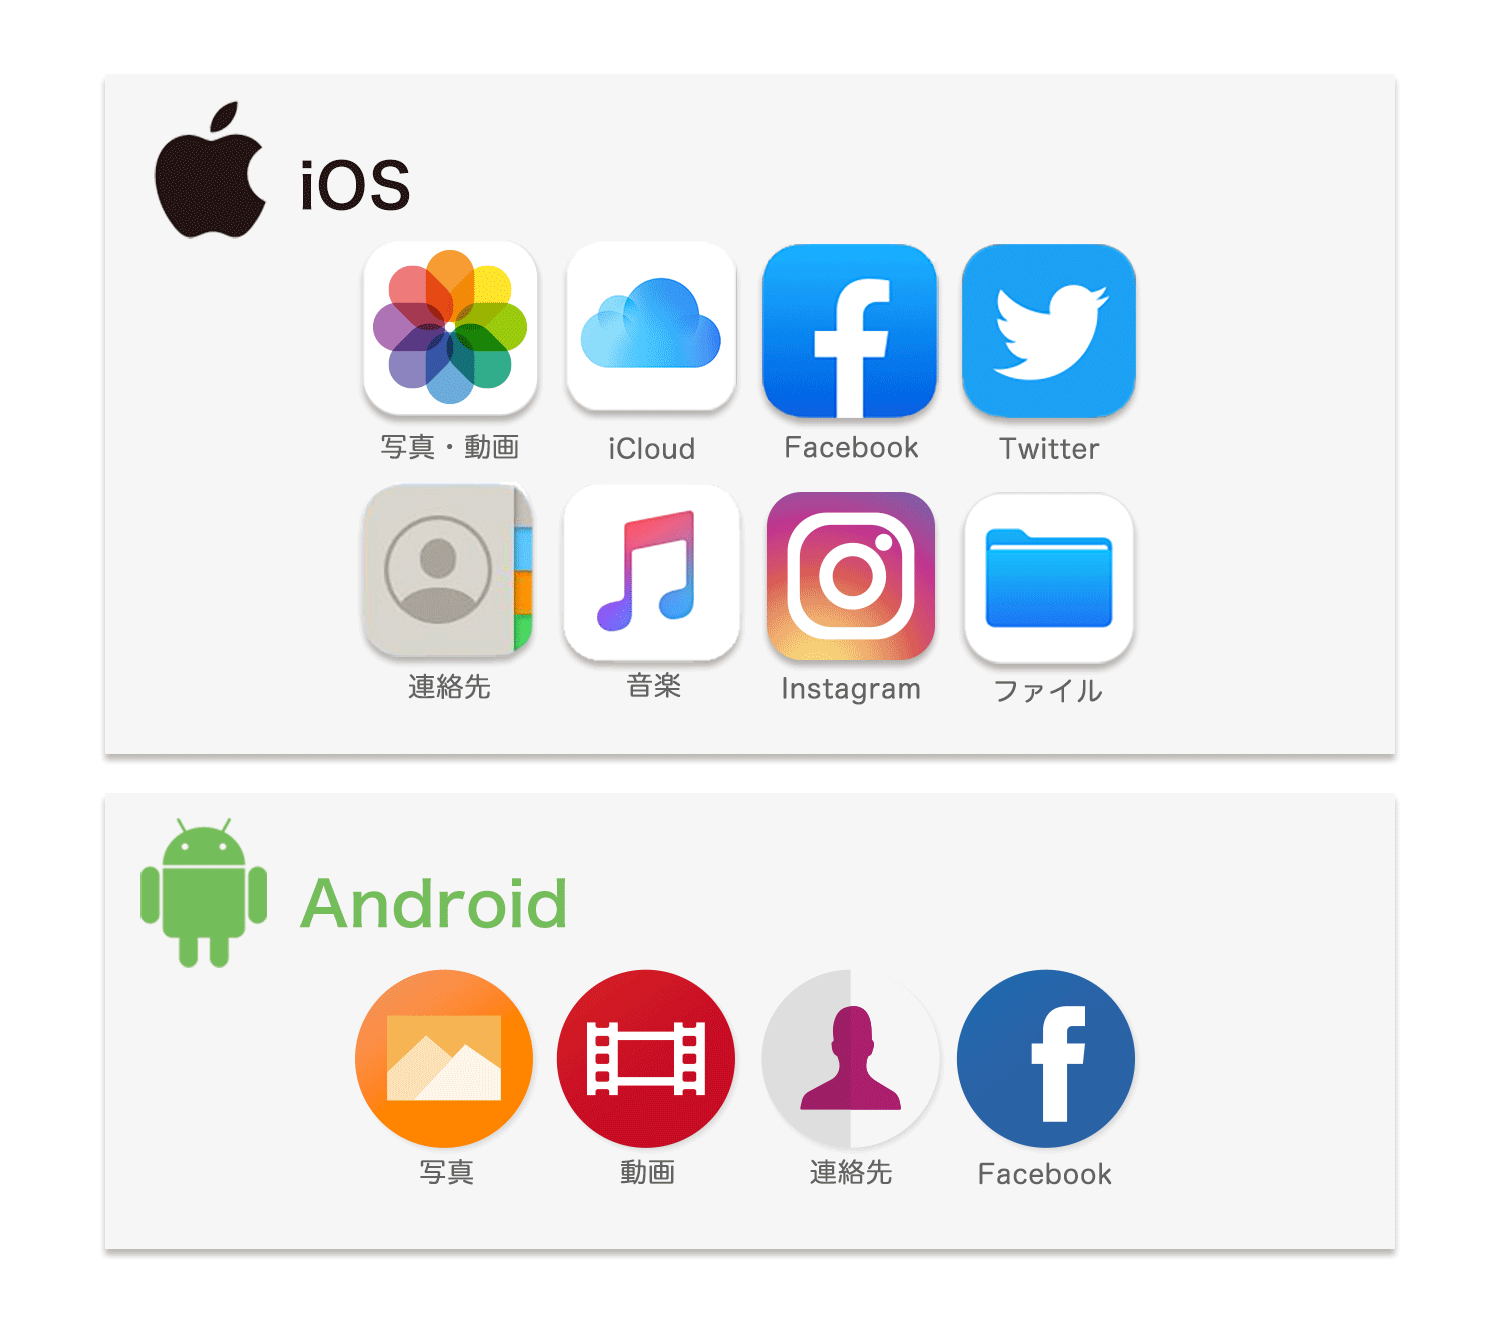 ●AndroidとiPhone両対応！機種変更しても安心